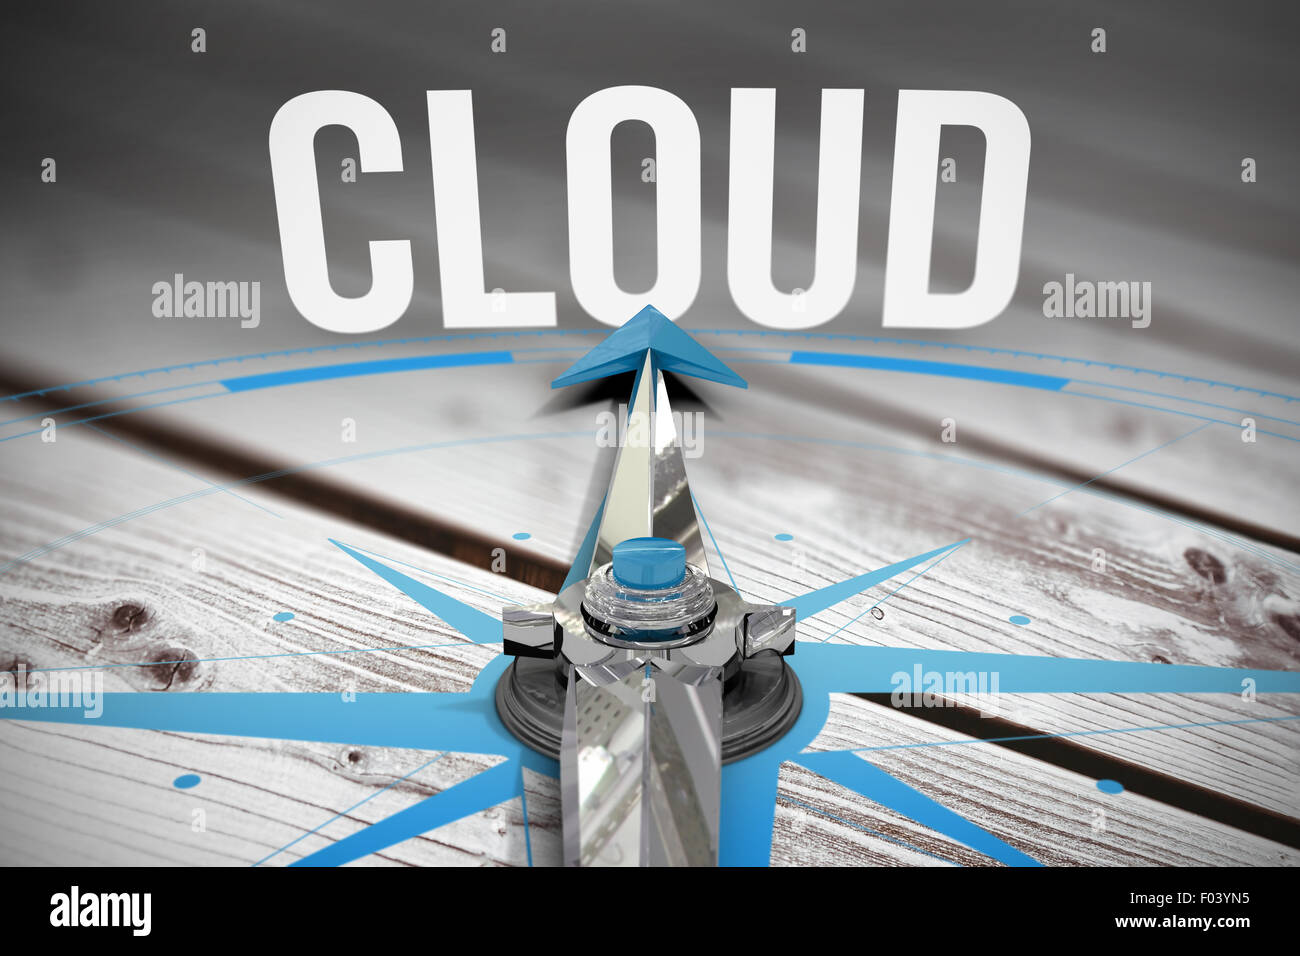 Cloud against digitally generated grey wooden planks Stock Photo